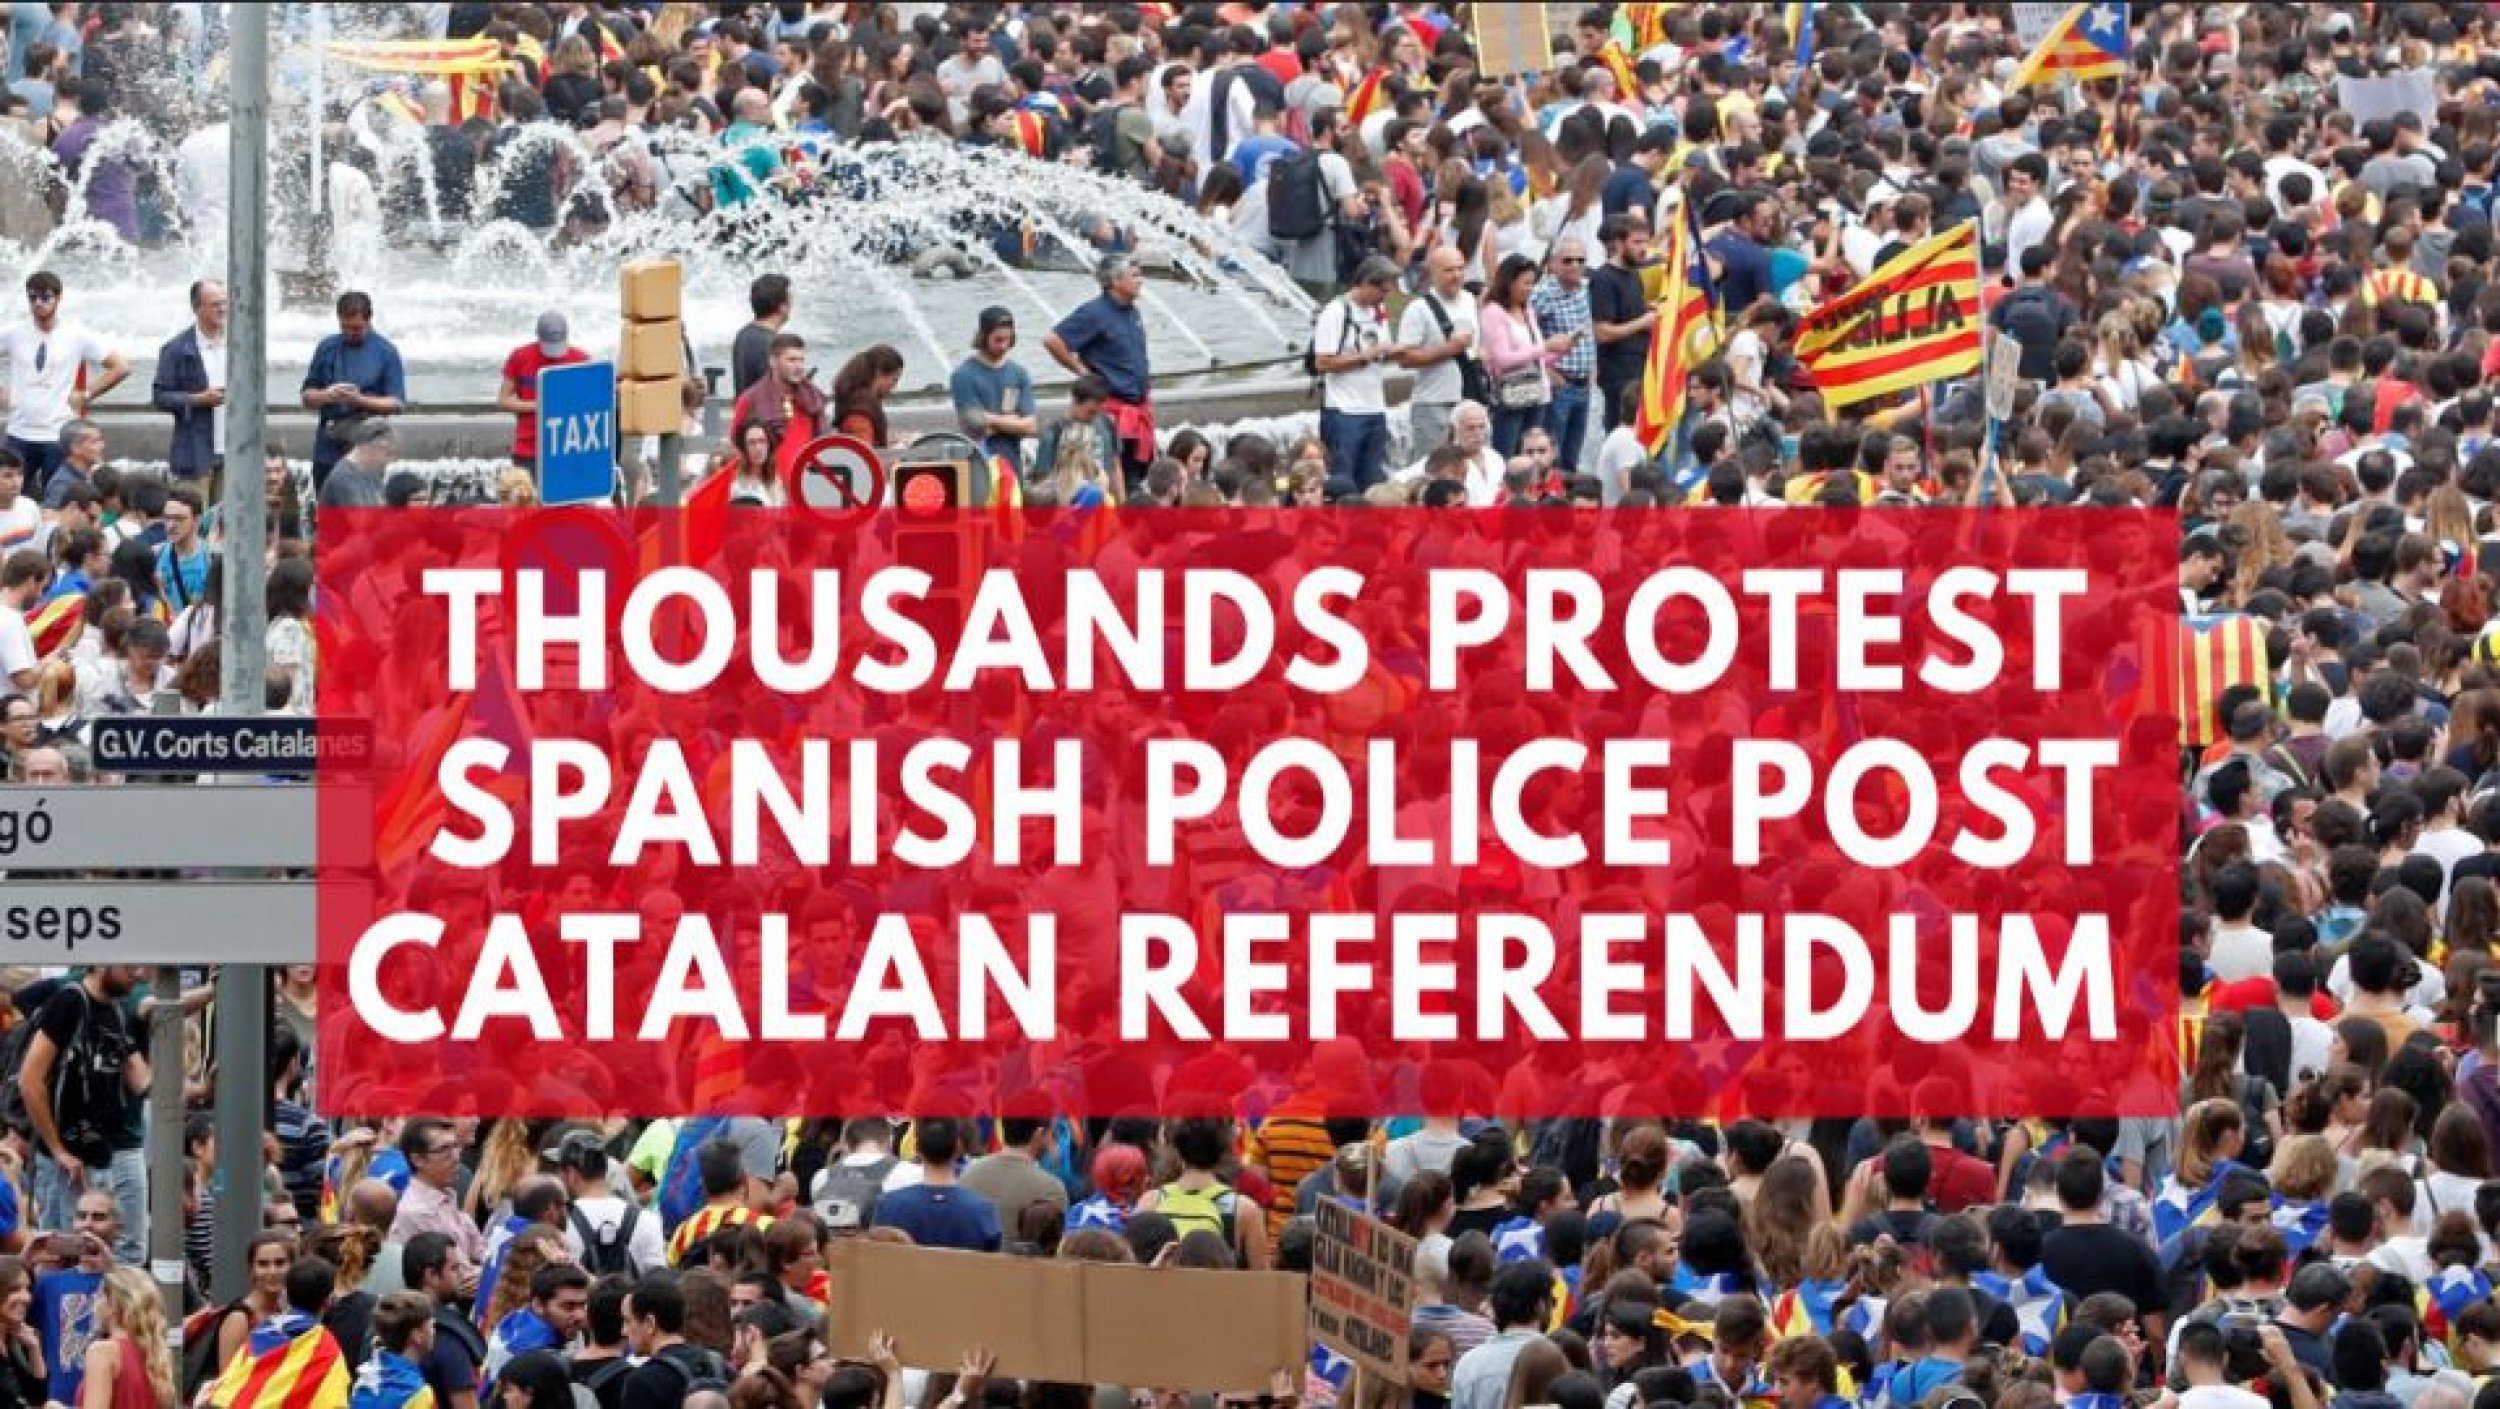 Spanish Police Crackdown During Catalan Referendum Causes Large Scale Protests 